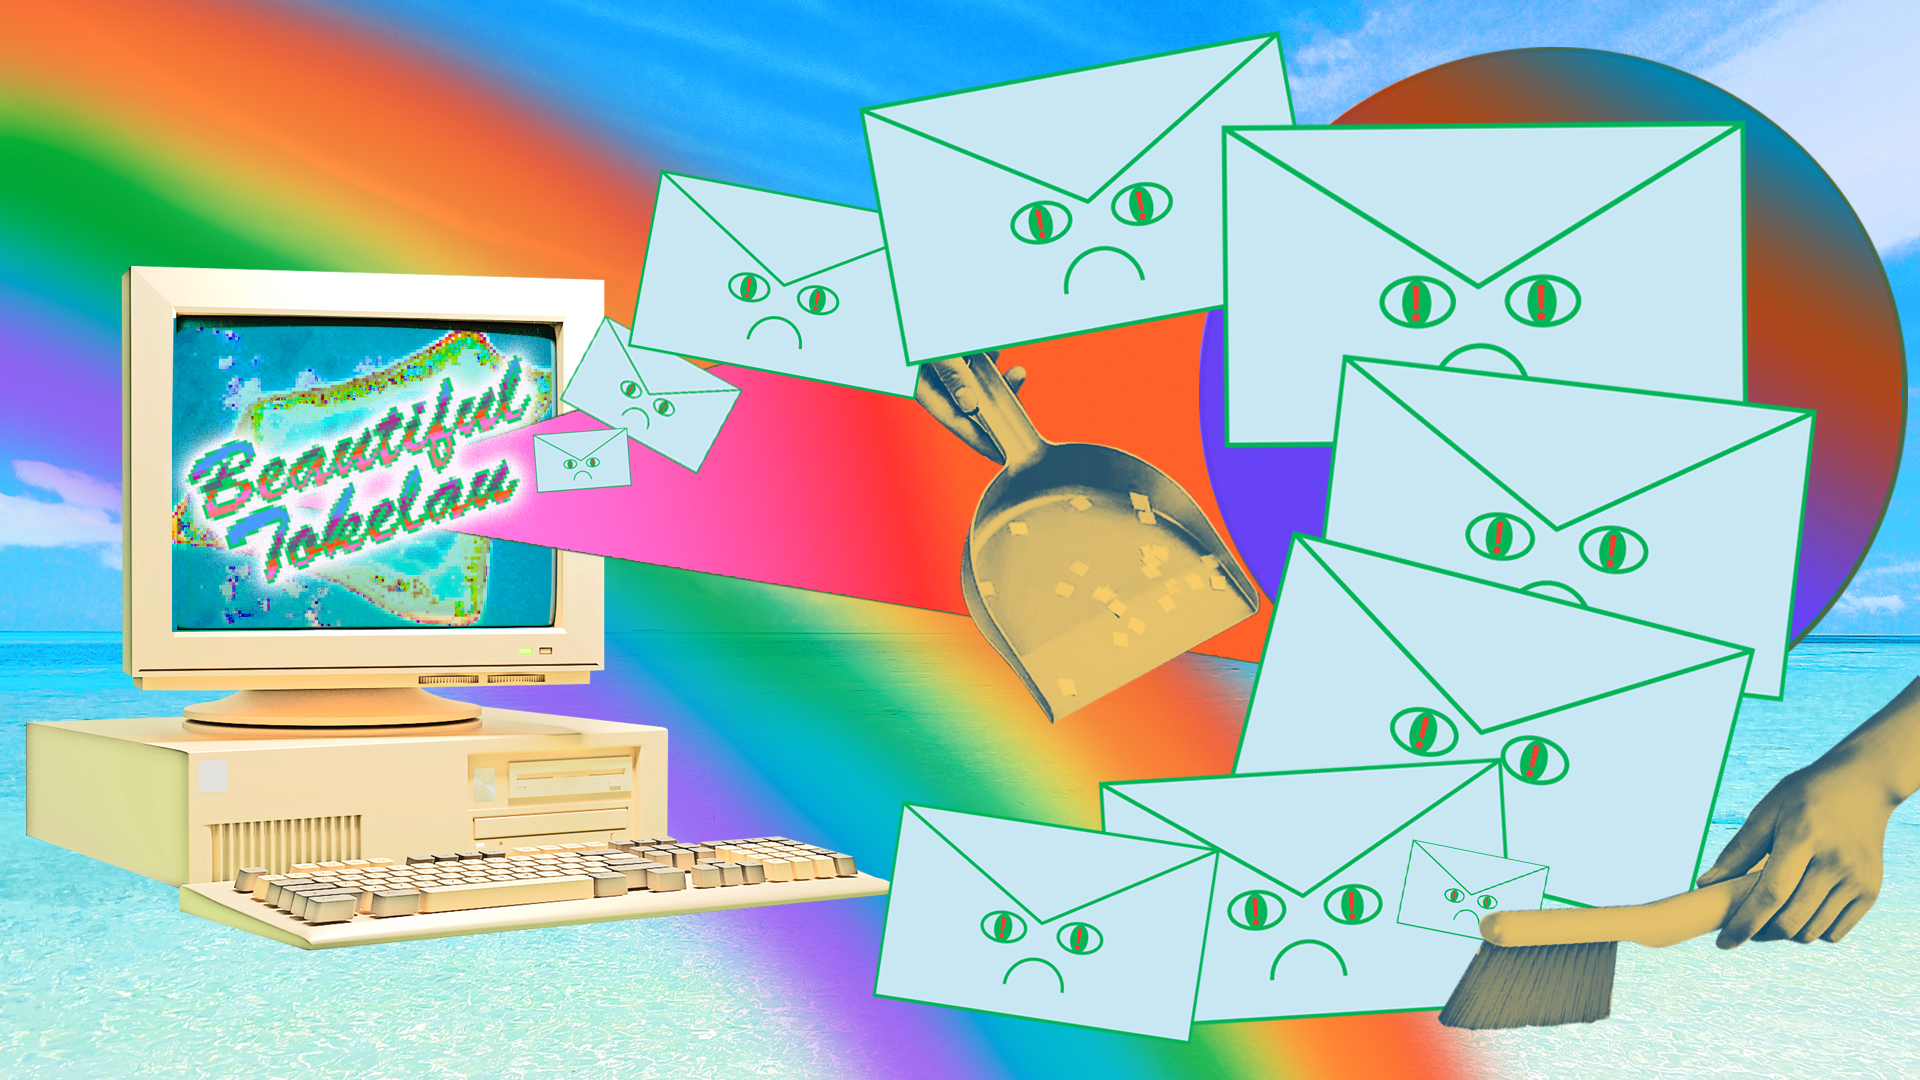 an older 90s style computer with an image of "Beautiful Tokelau" emits spam emails with a hand holding a dust pan and brush tries to scoop them up